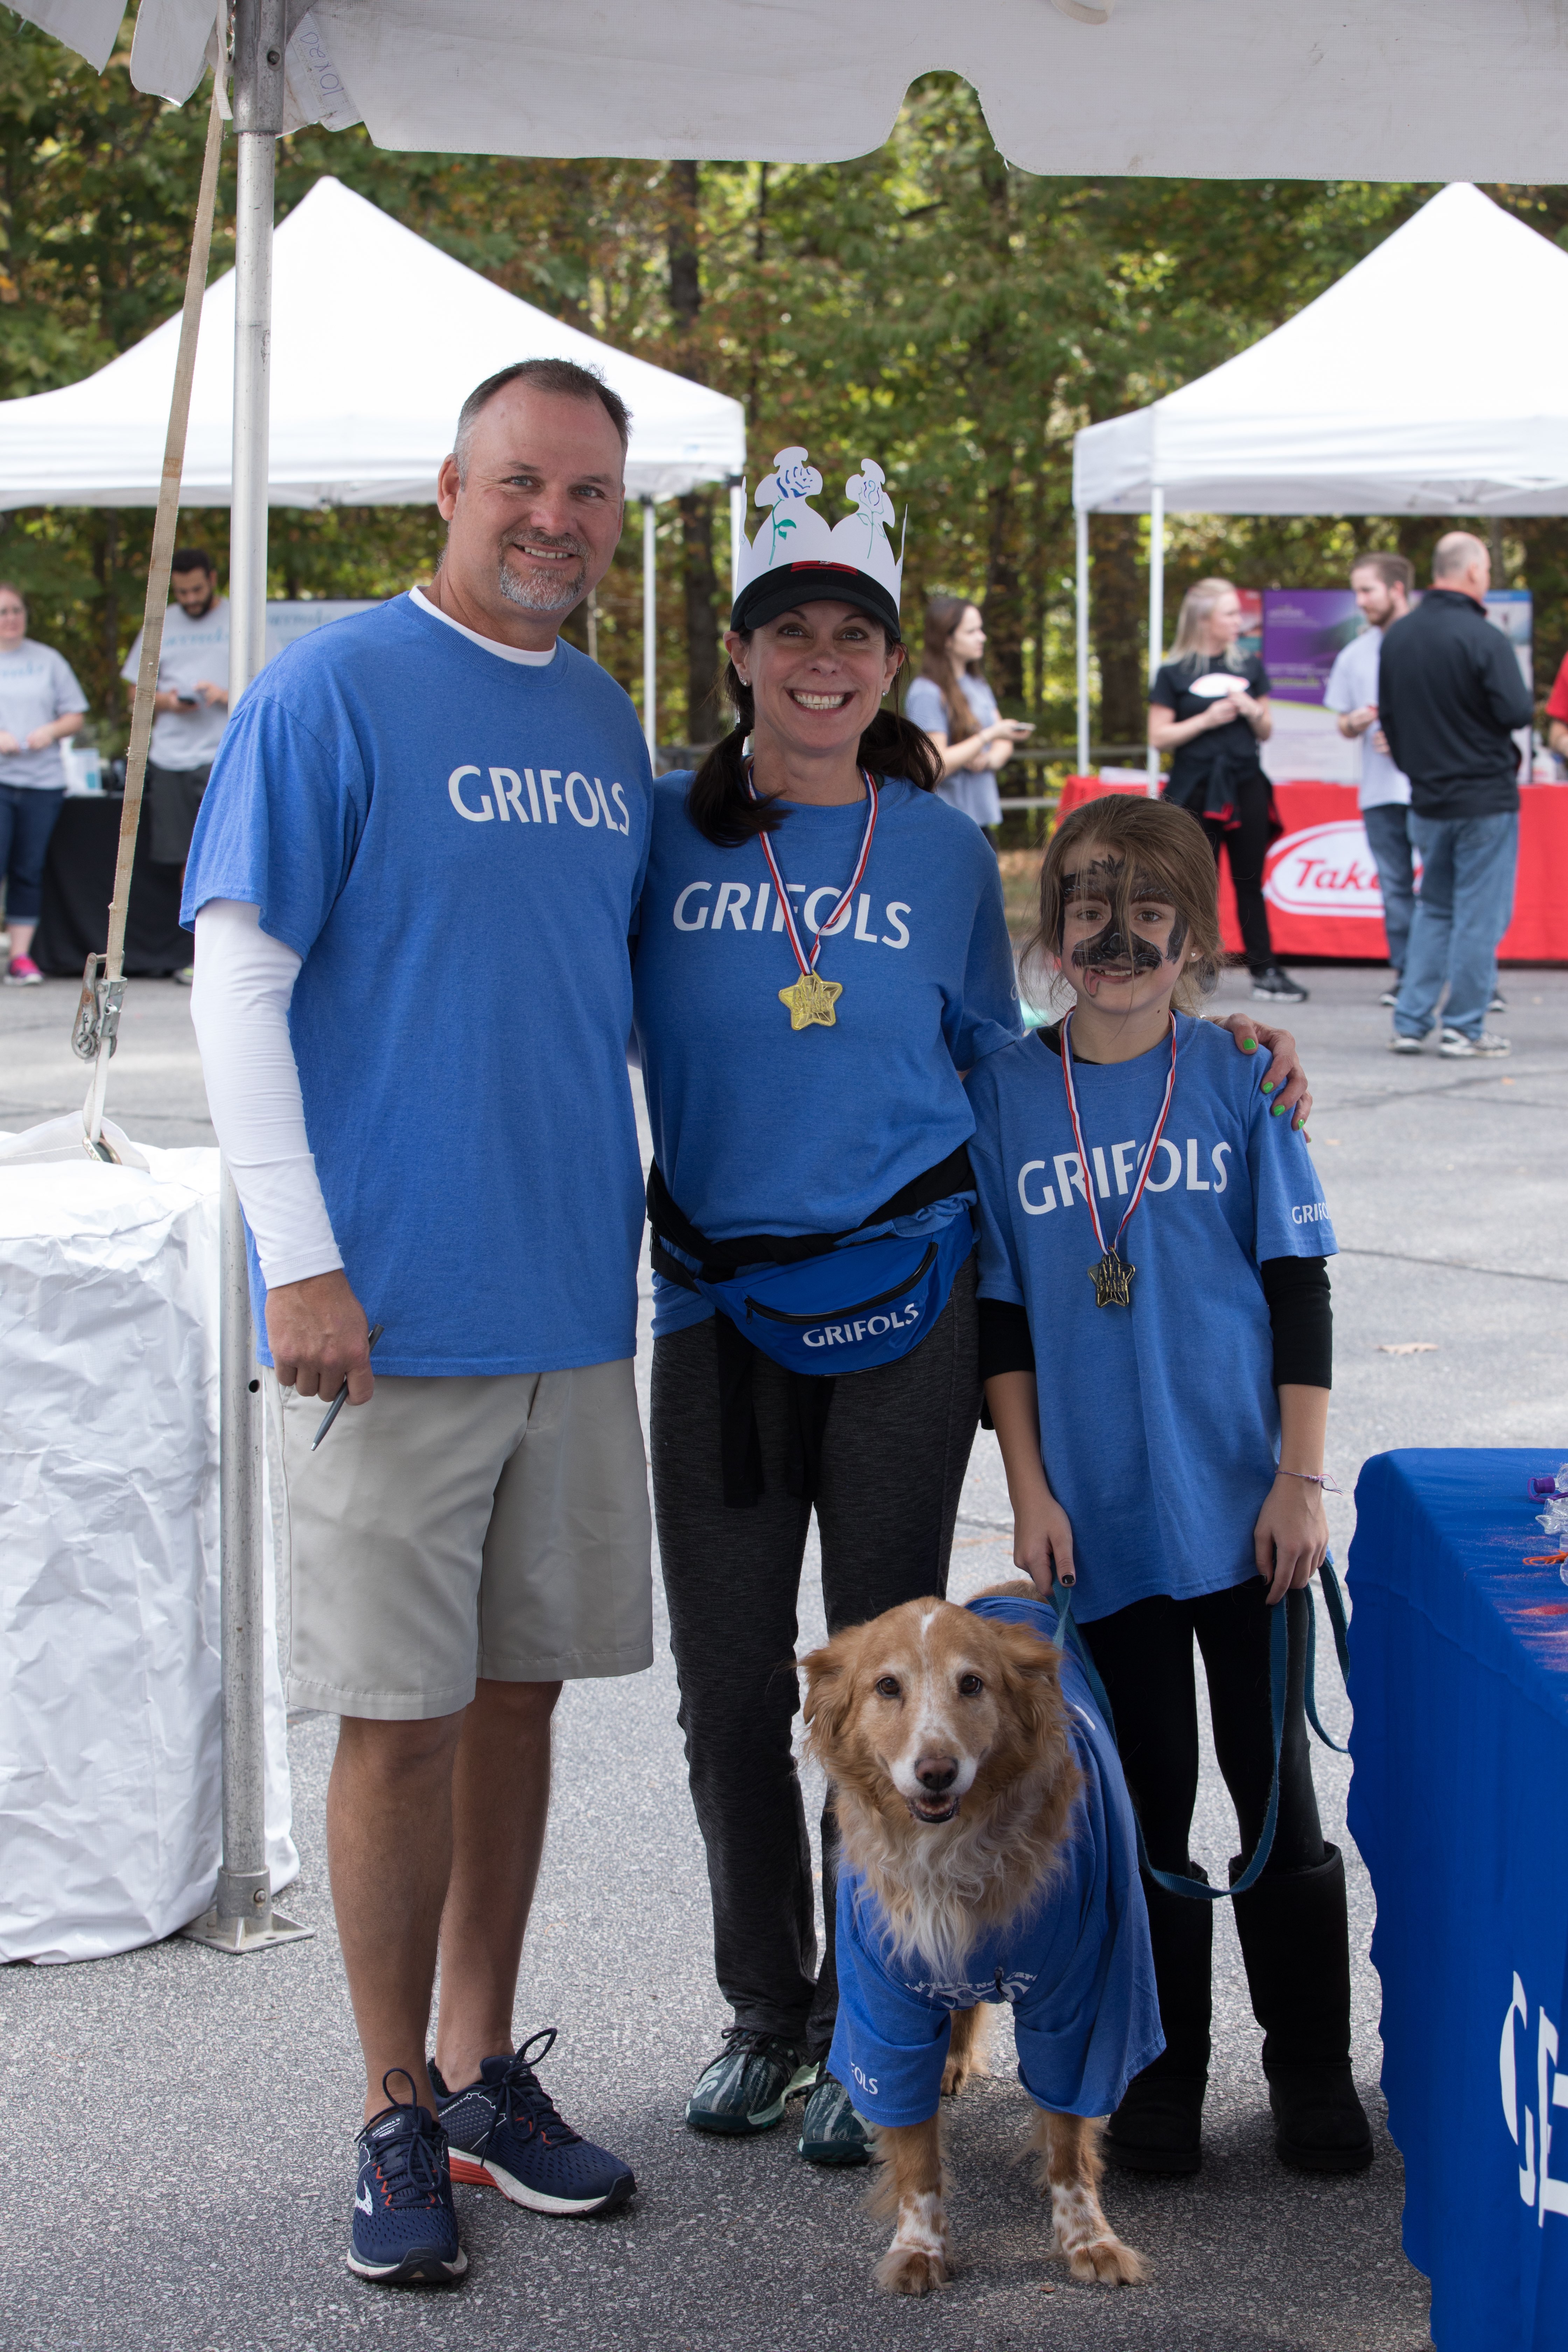 Thank you to our Presenting Sponsor, GRIFOLS!!